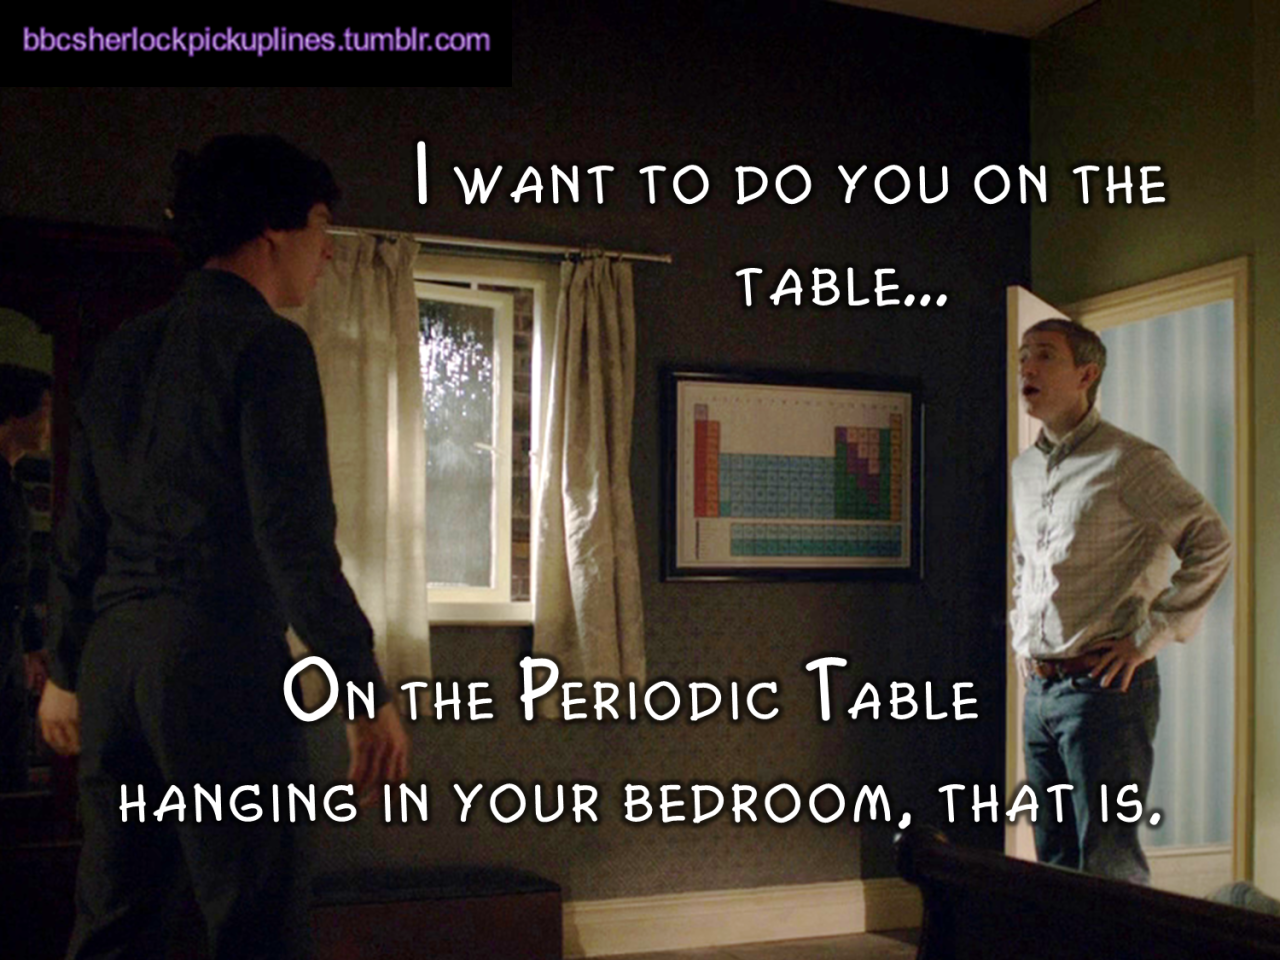 &ldquo;I want to do you on the tableâ€¦ On the Periodic Table hanging in